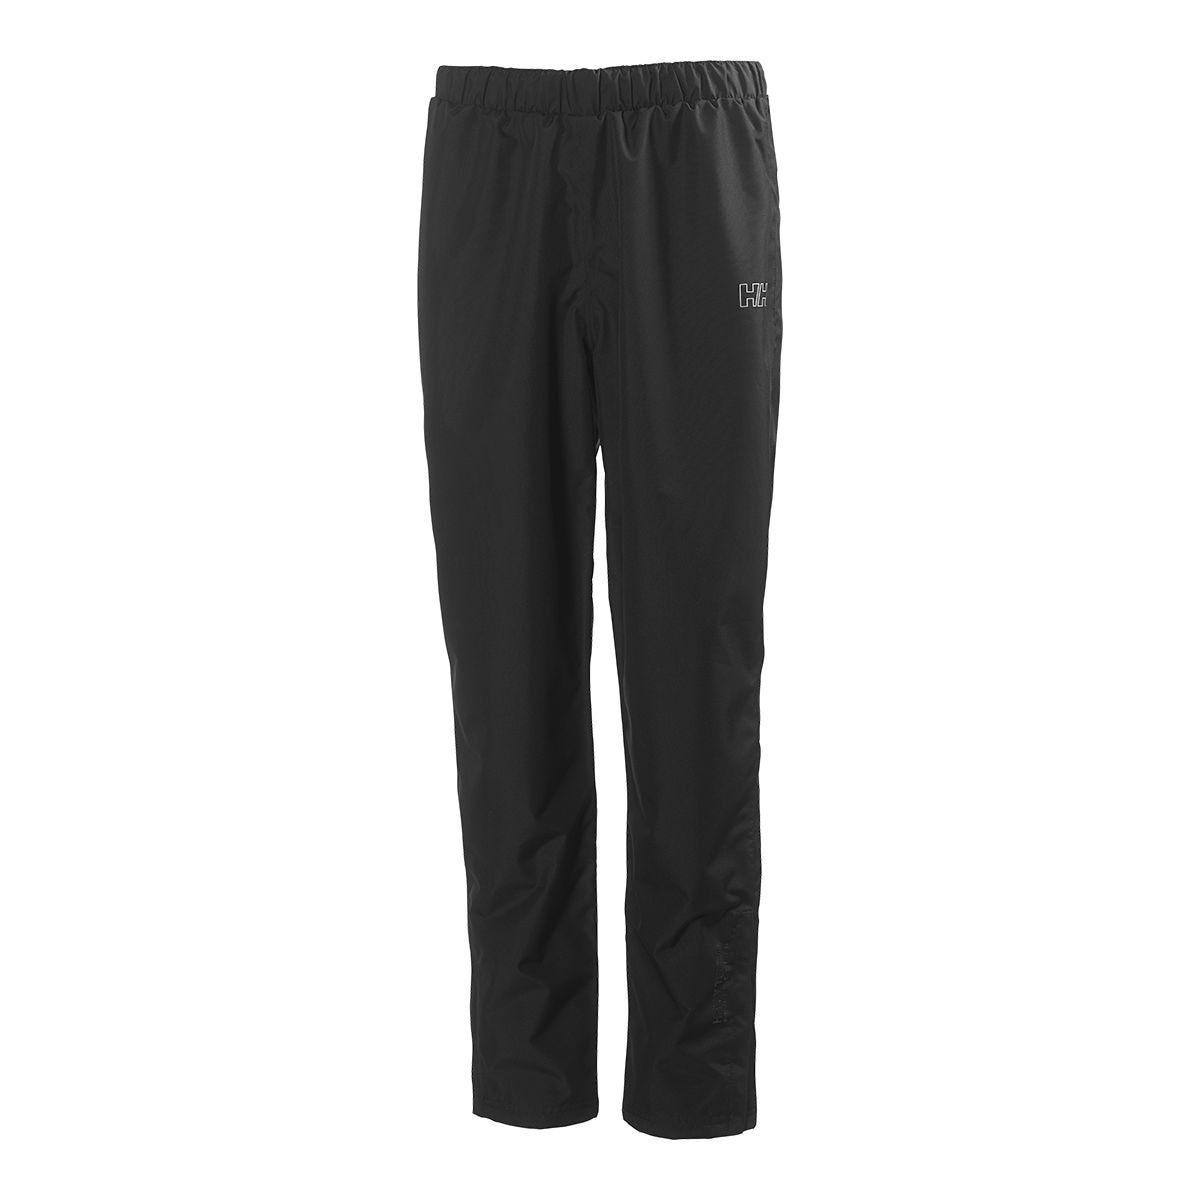 Helly Hansen Women's Diamond Quilted Down Pants